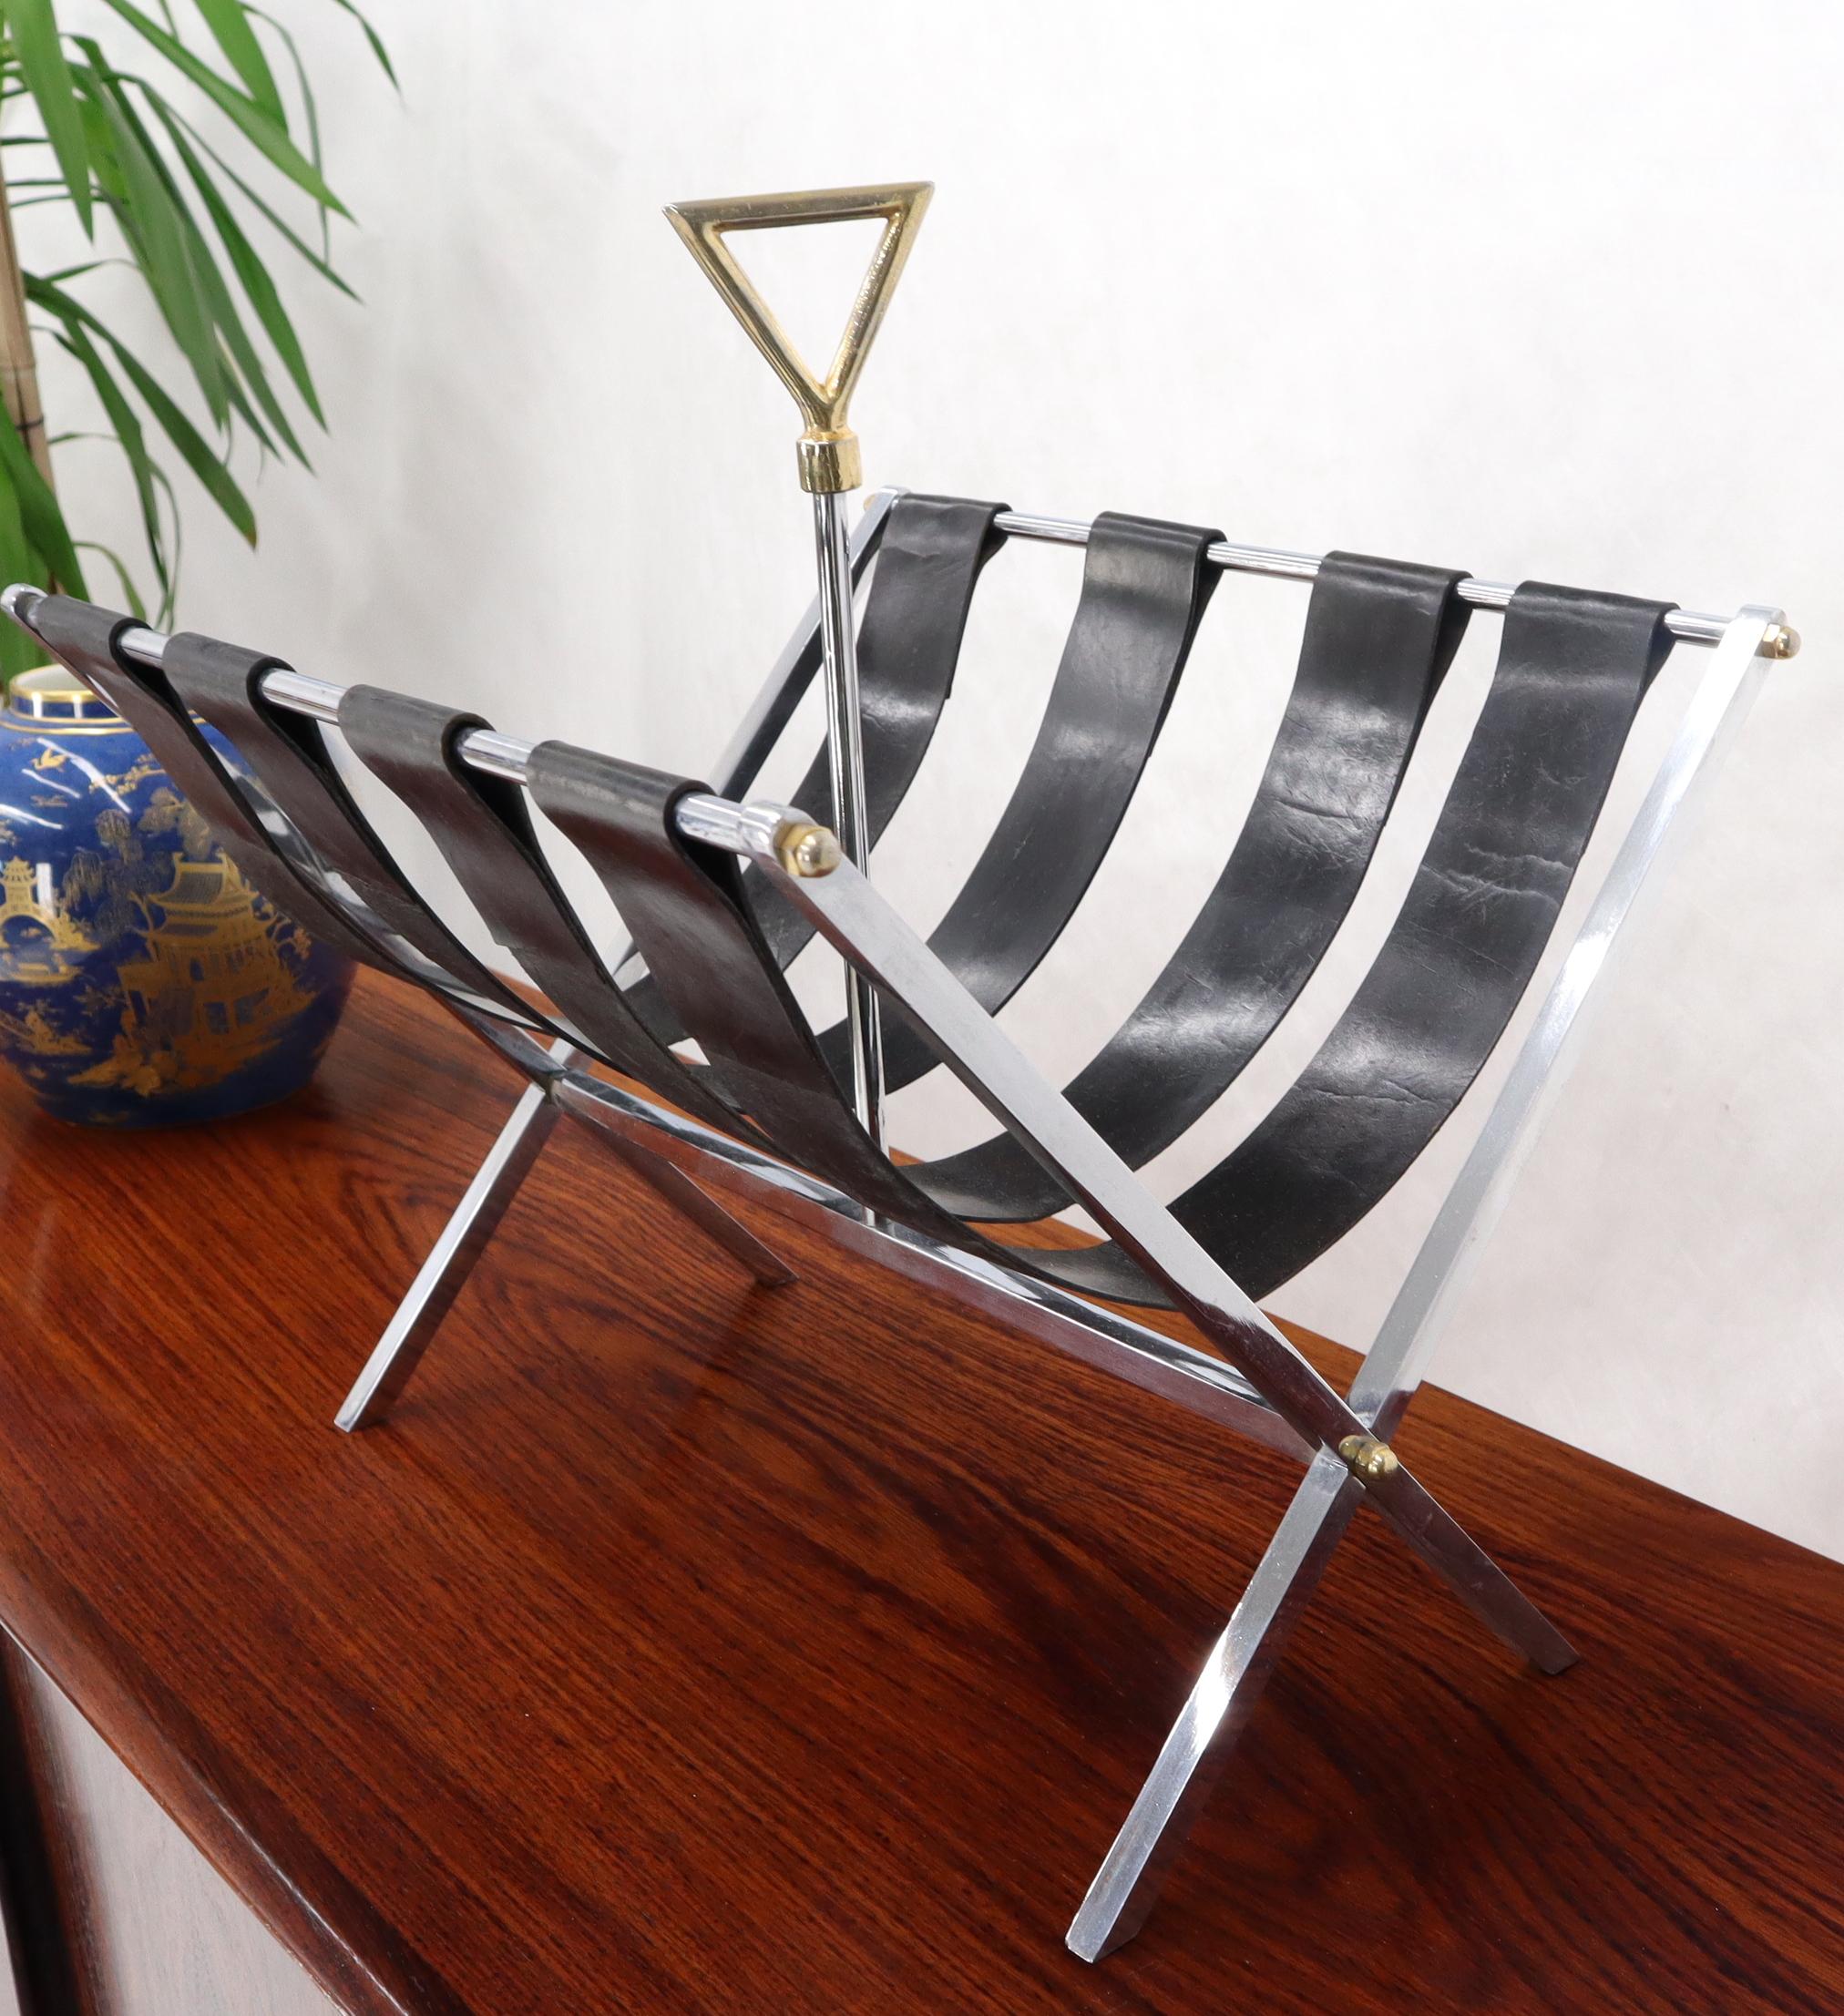 Machined Chrome Bar X Base Brass Nuts and Leather Belts Magazine Rack Shelf In Good Condition For Sale In Rockaway, NJ